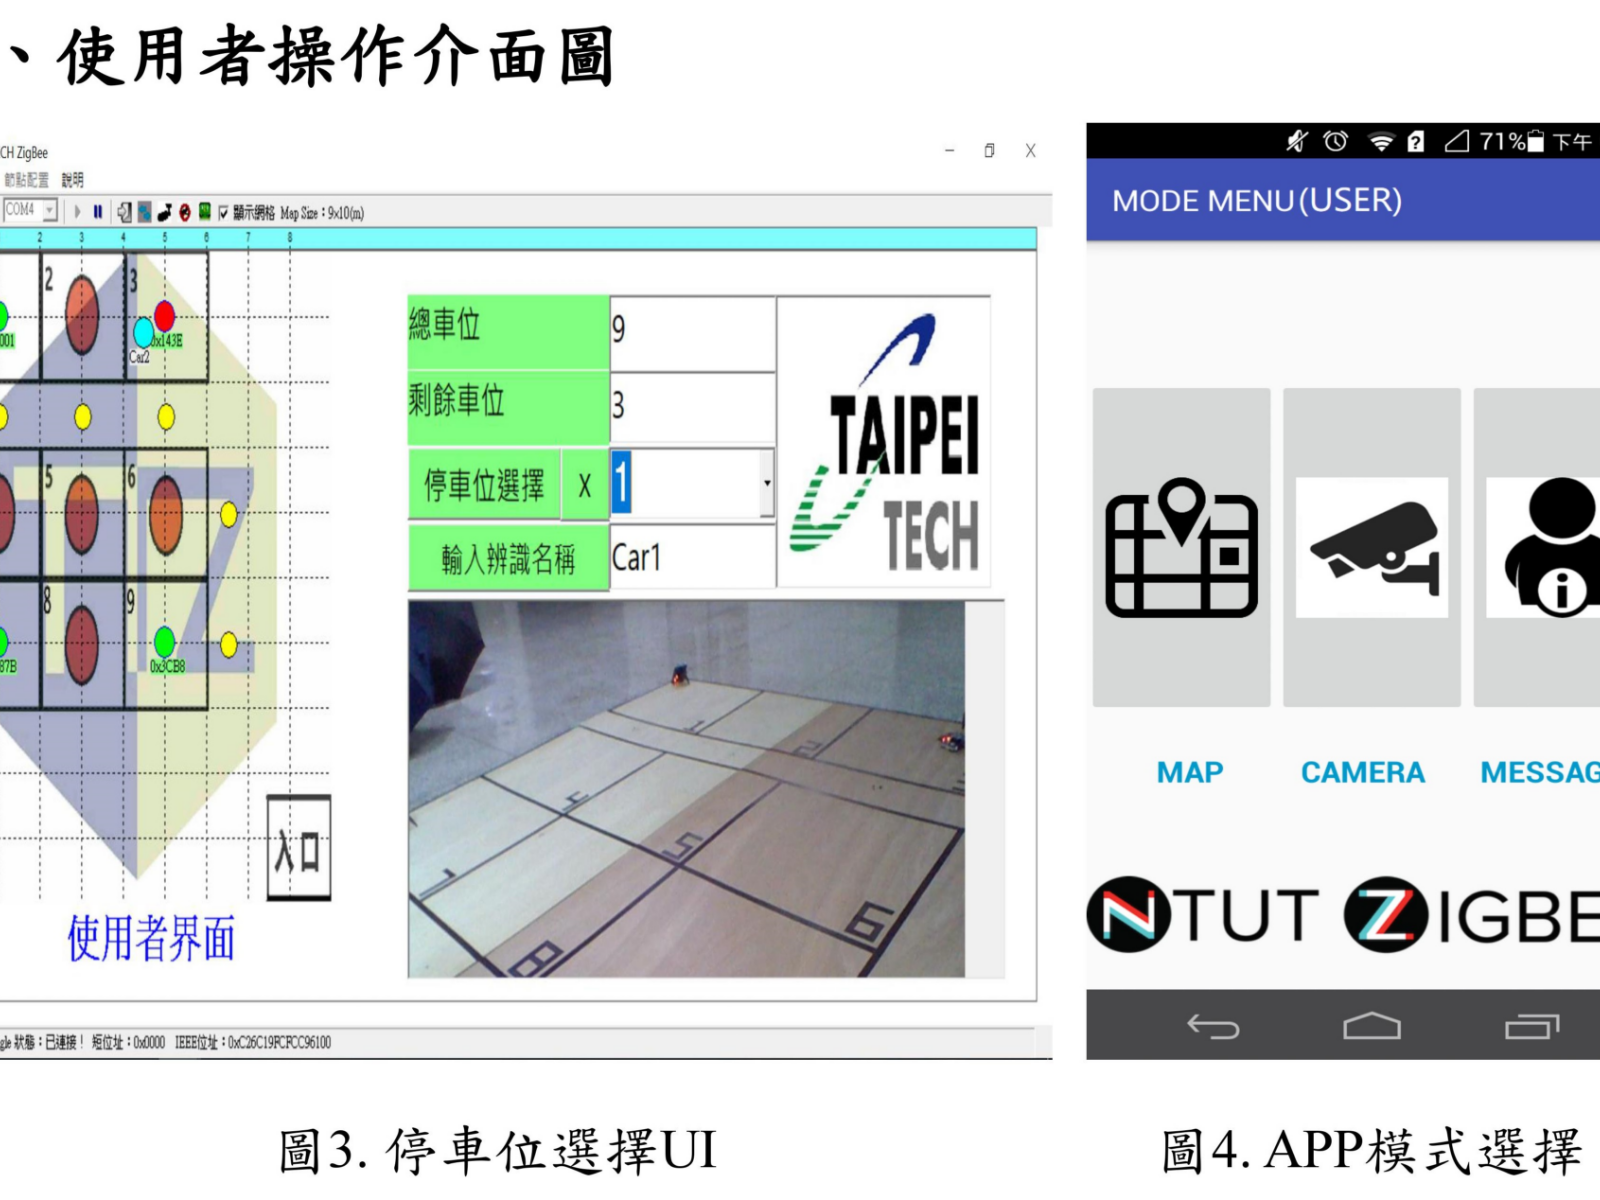 Cover of Parking management system based on ZigBee network.